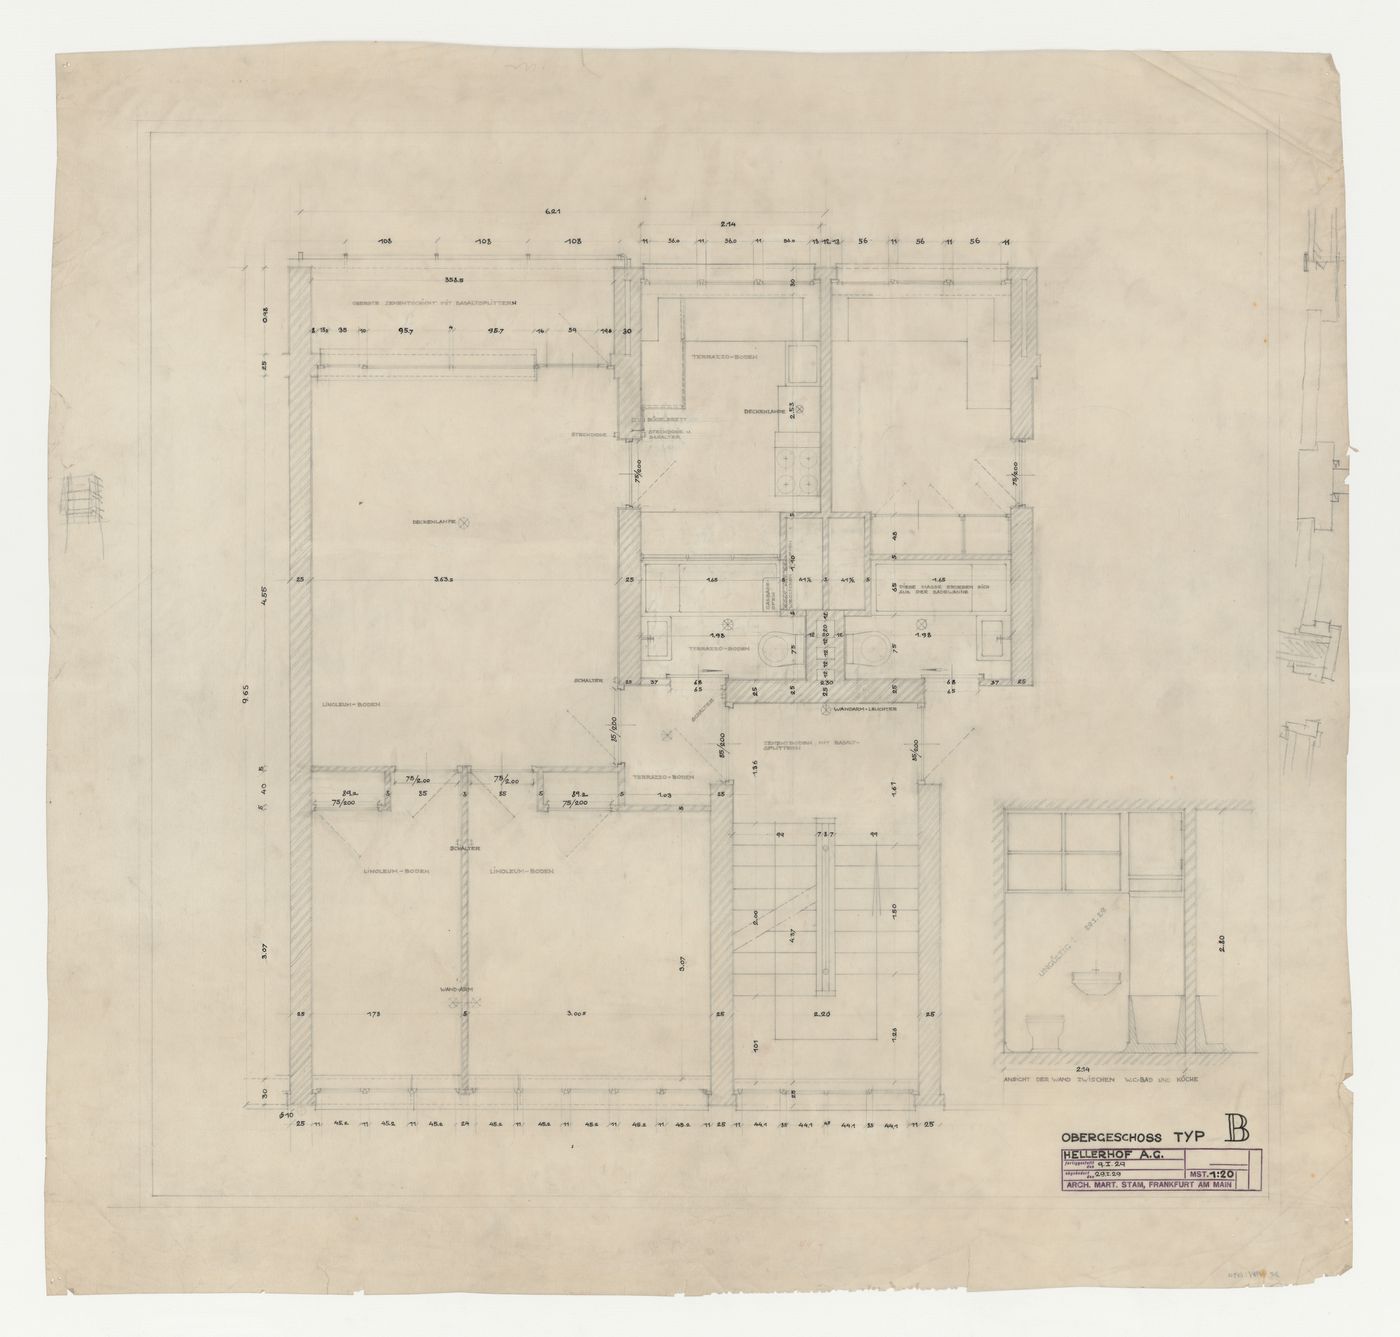 First floor plan and section for a type B housing unit, Hellerhof Housing Estate, Frankfurt am Main, Germany